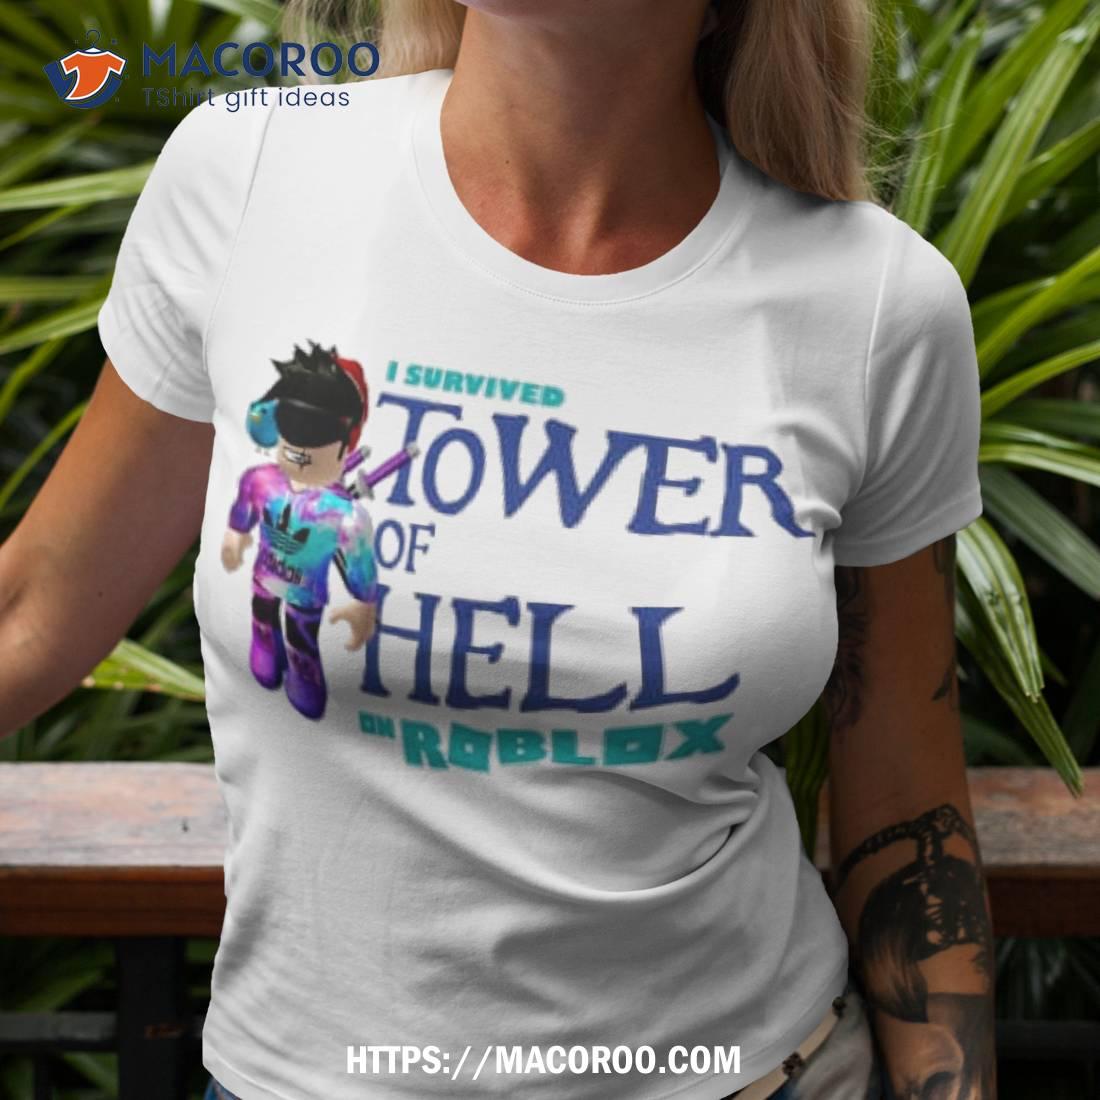 I Survived Tower Of Hell On Roblox Shirt